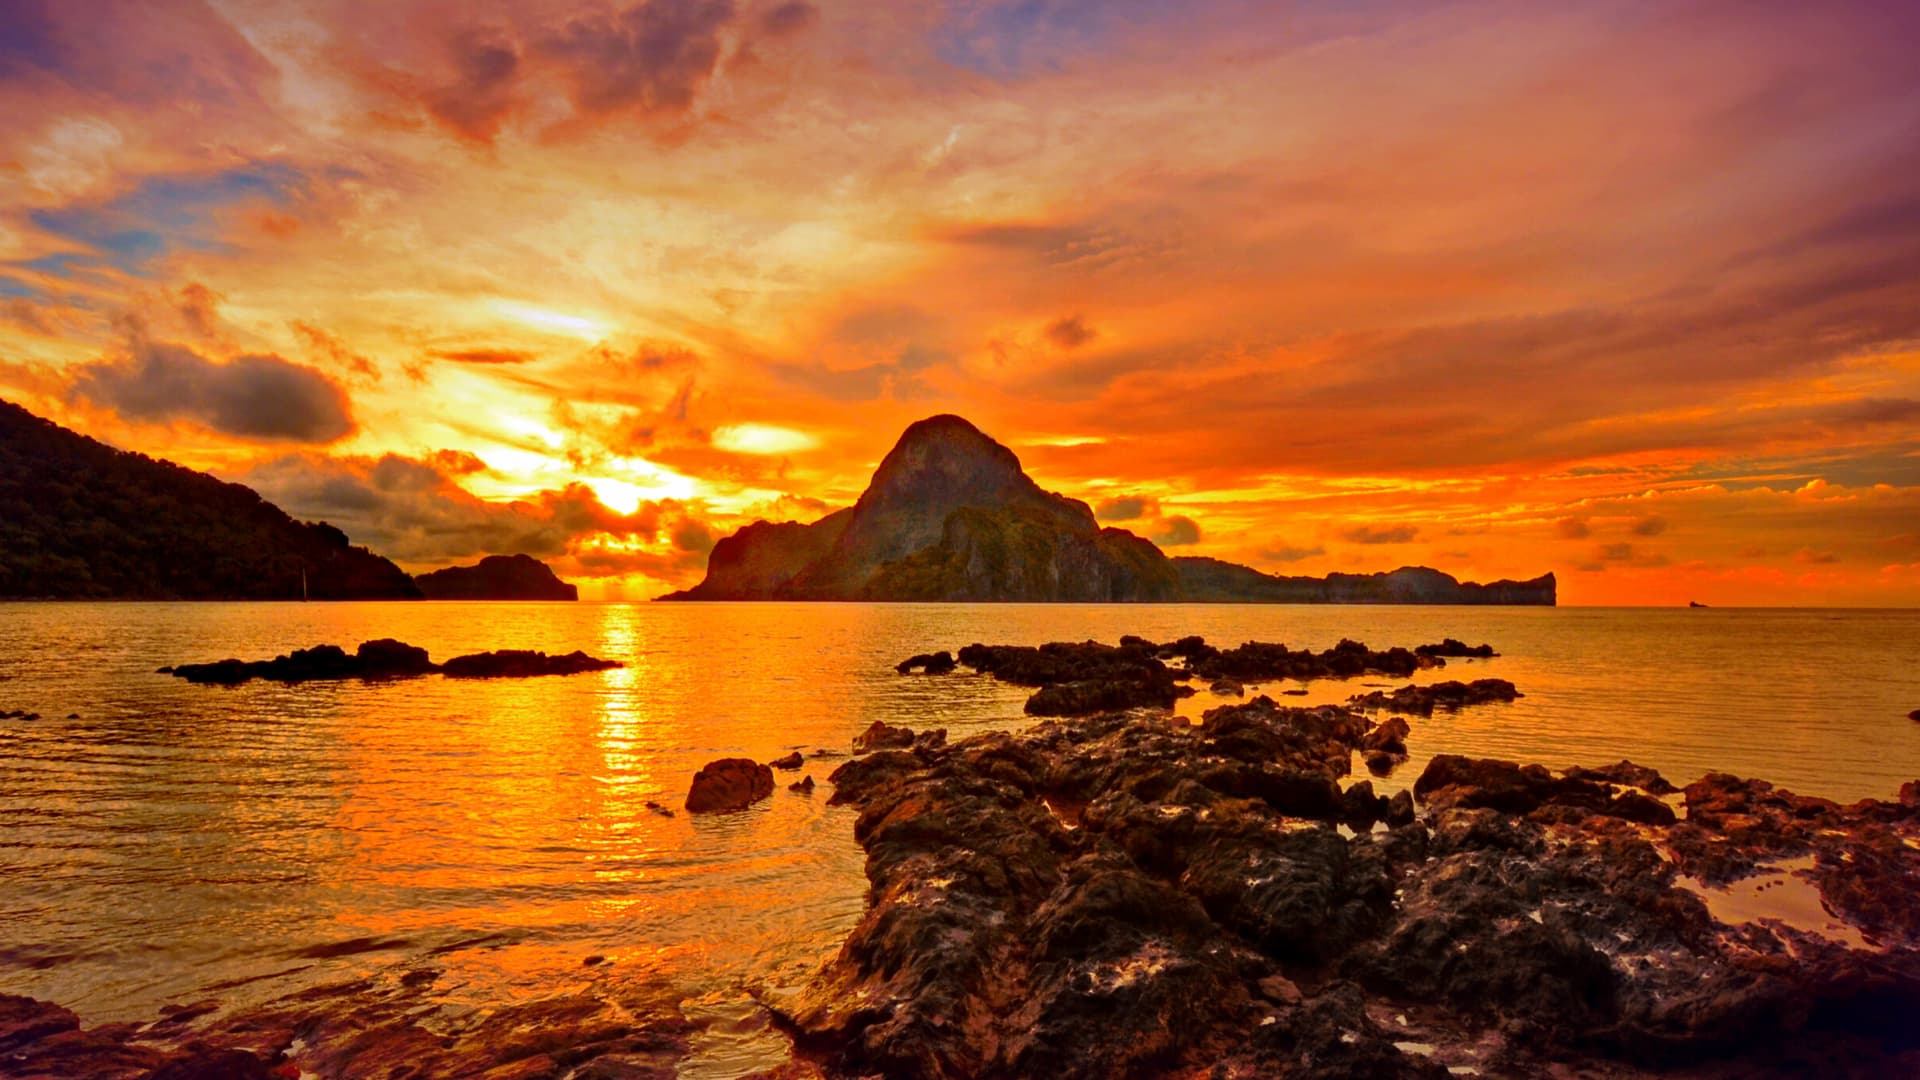 The List Of Best Sunset Spots In The World Includes These Middle